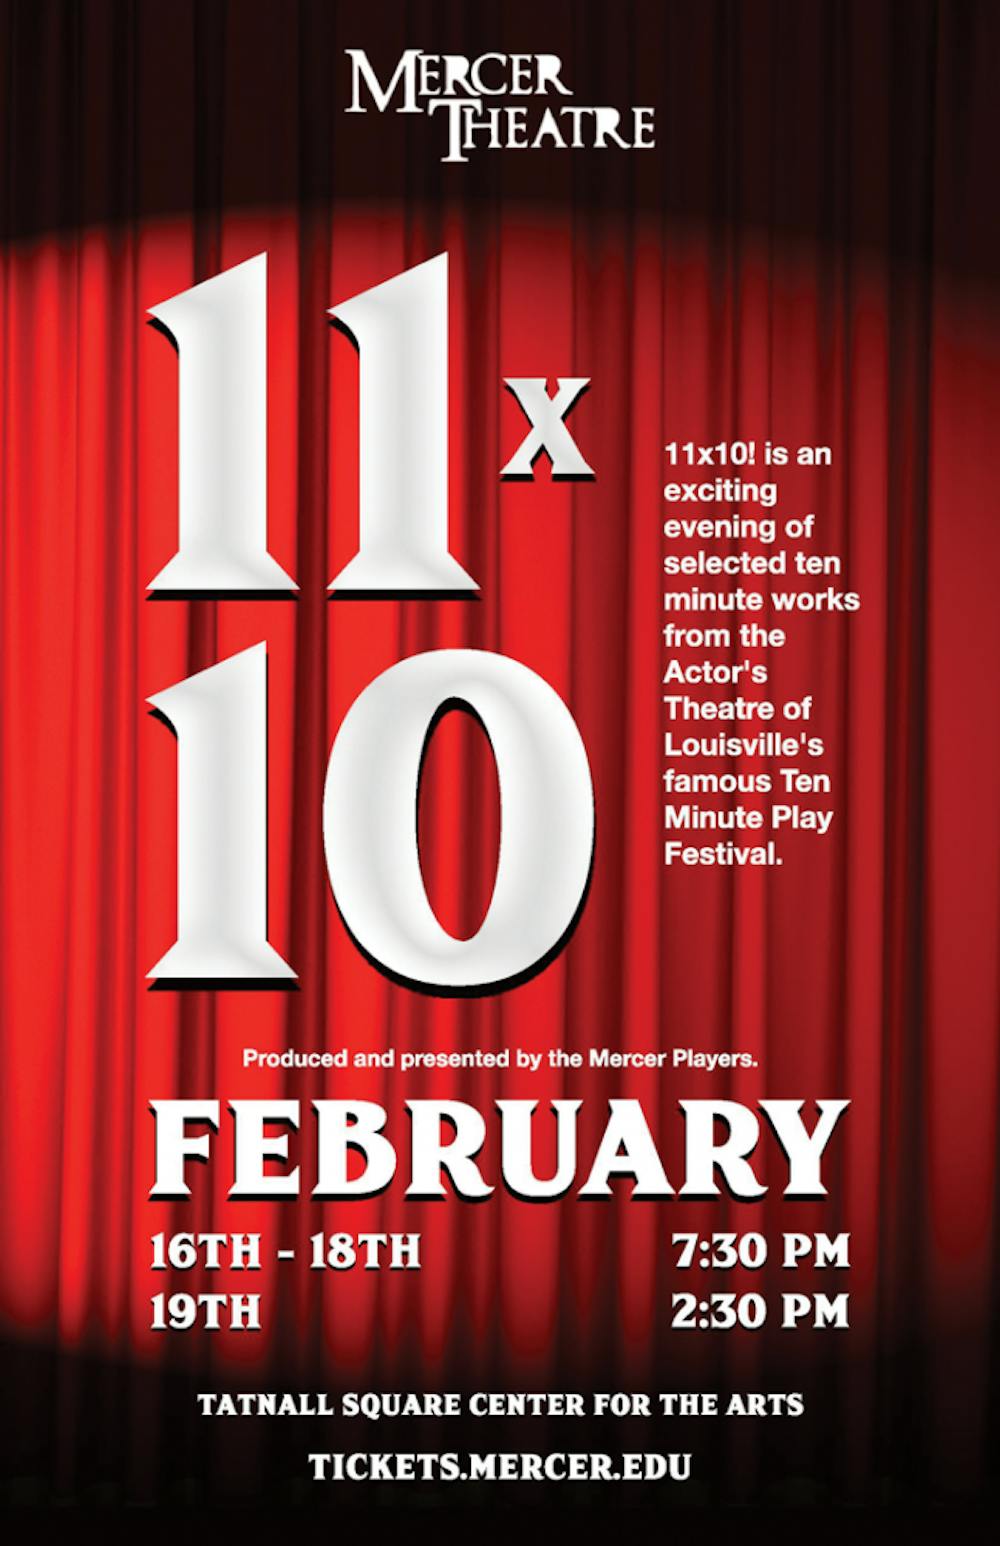 The Mercer Players’ production of “11x10” will feature 11 different 10-minute plays, all directed by members of Mercer’s current Directing class.
